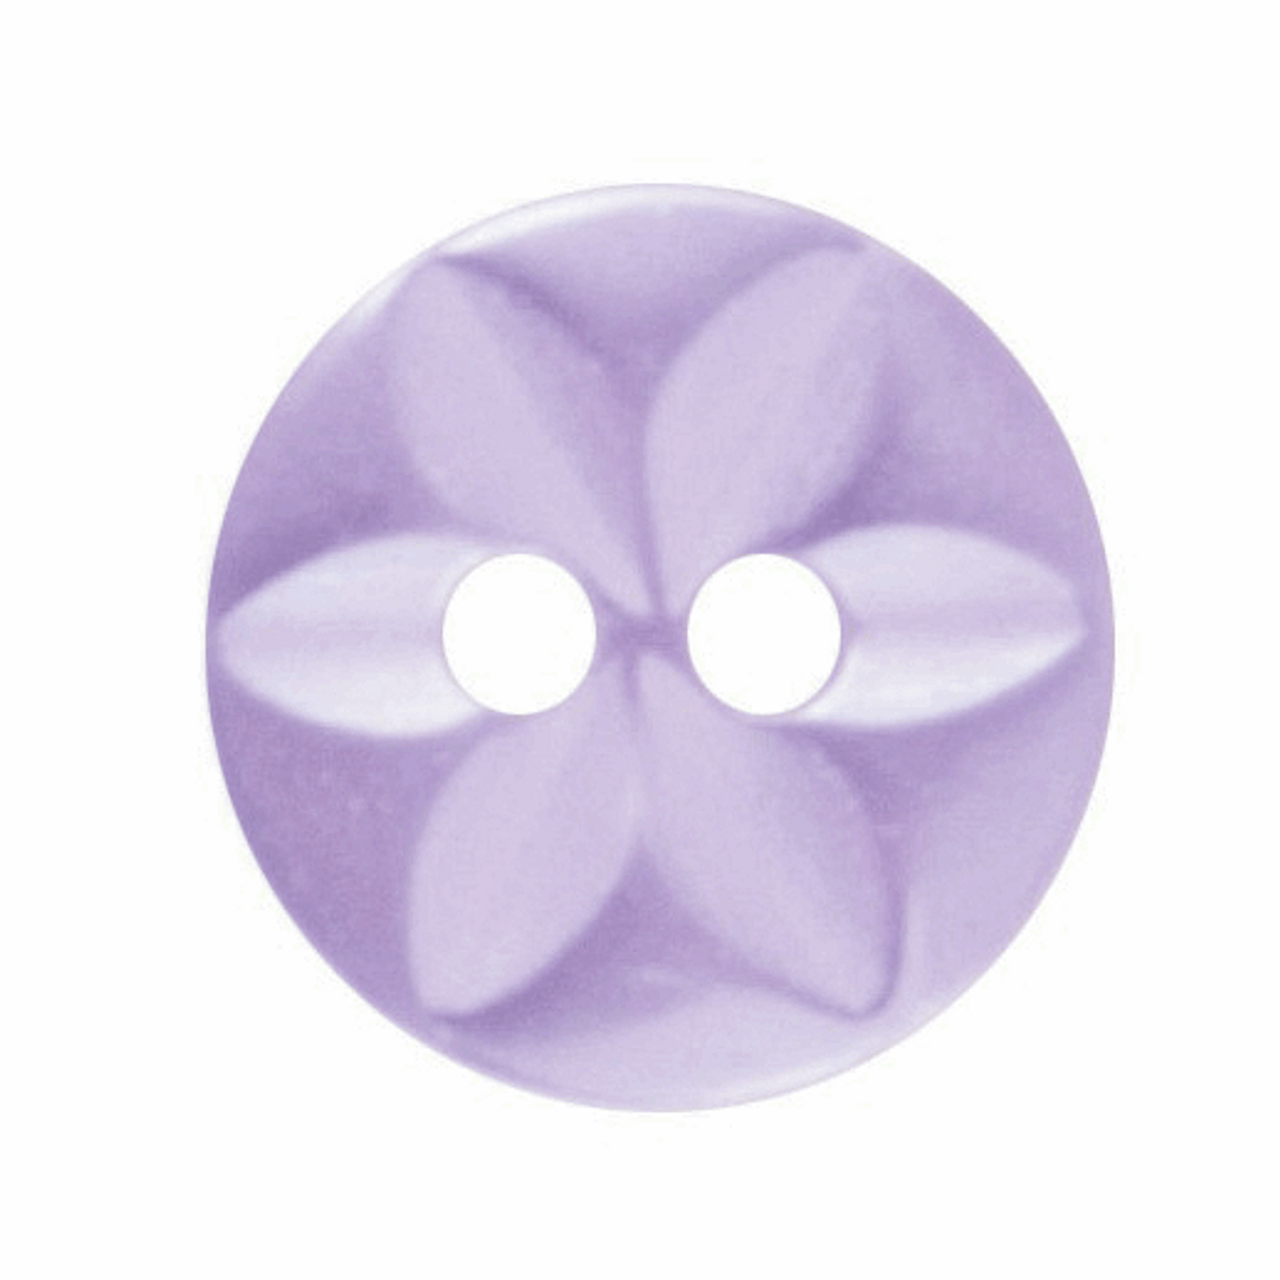 Lilac Star Button, 11mm (7/16in) Diameter (Sold Individually)